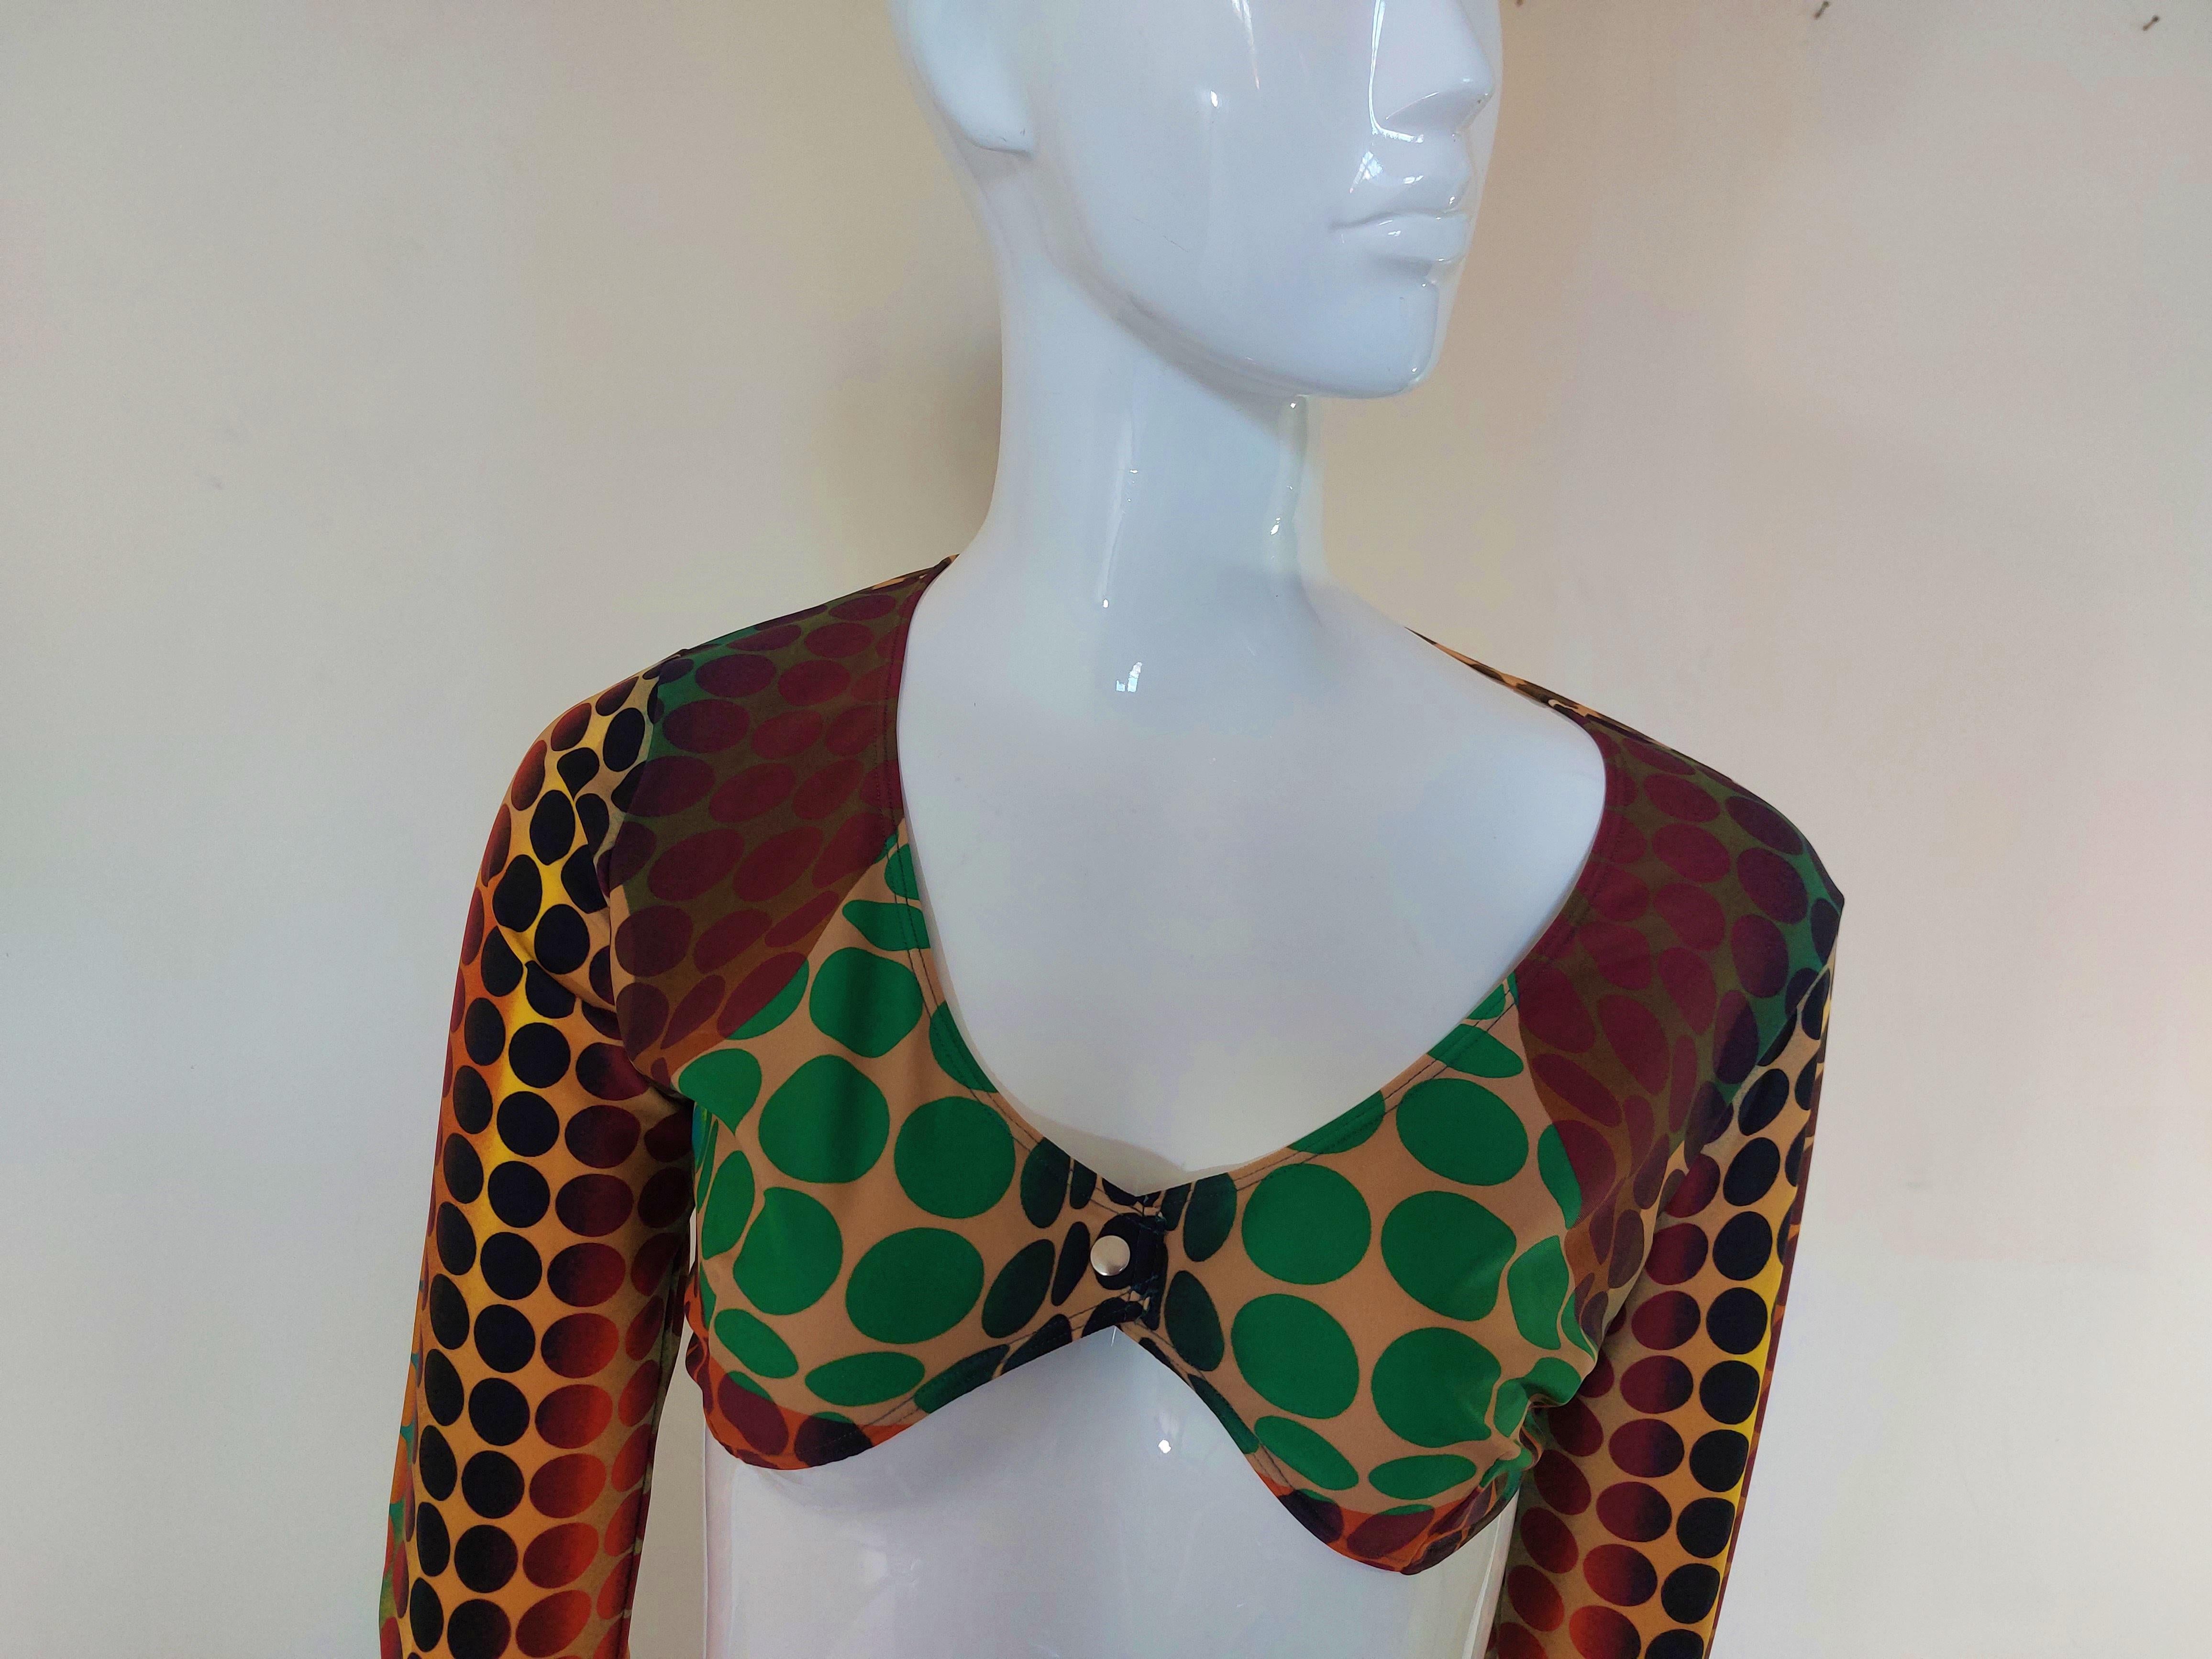  Jean-Paul Gaultier Cyber Psychedelic Dots  Optical Illusion Crop top Bustier  For Sale 6